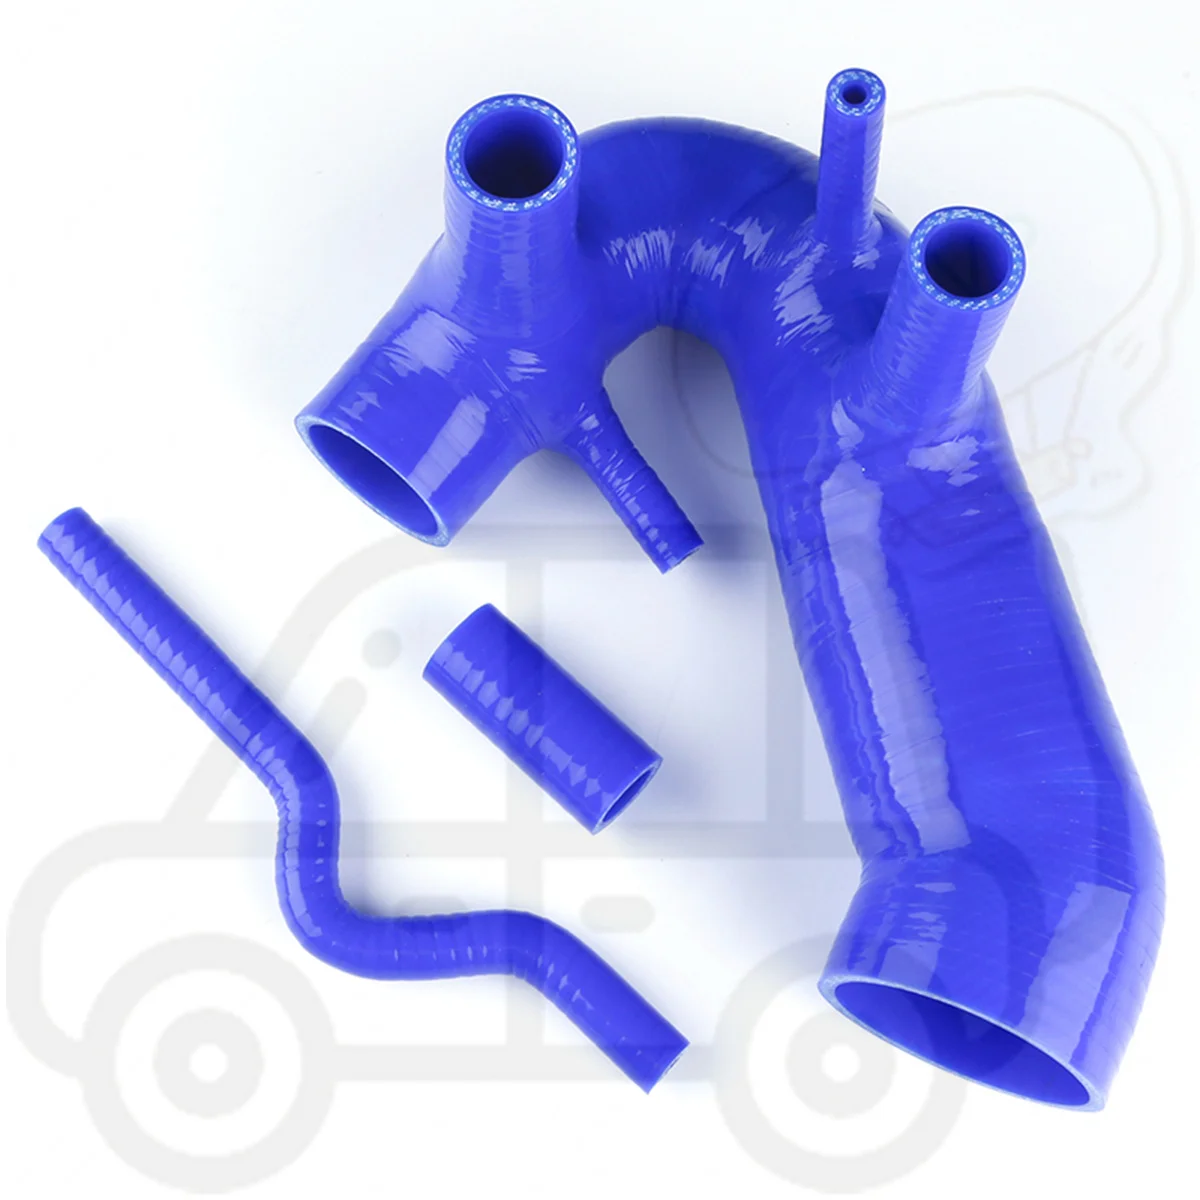 

For 1994-2005 Audi A4 VW Passat B5 B5.5 1.8T Turbo Silicone Induction Intake Hose 4-PLY 95 96 97 98 99 2000 2001 2002 2003 2004